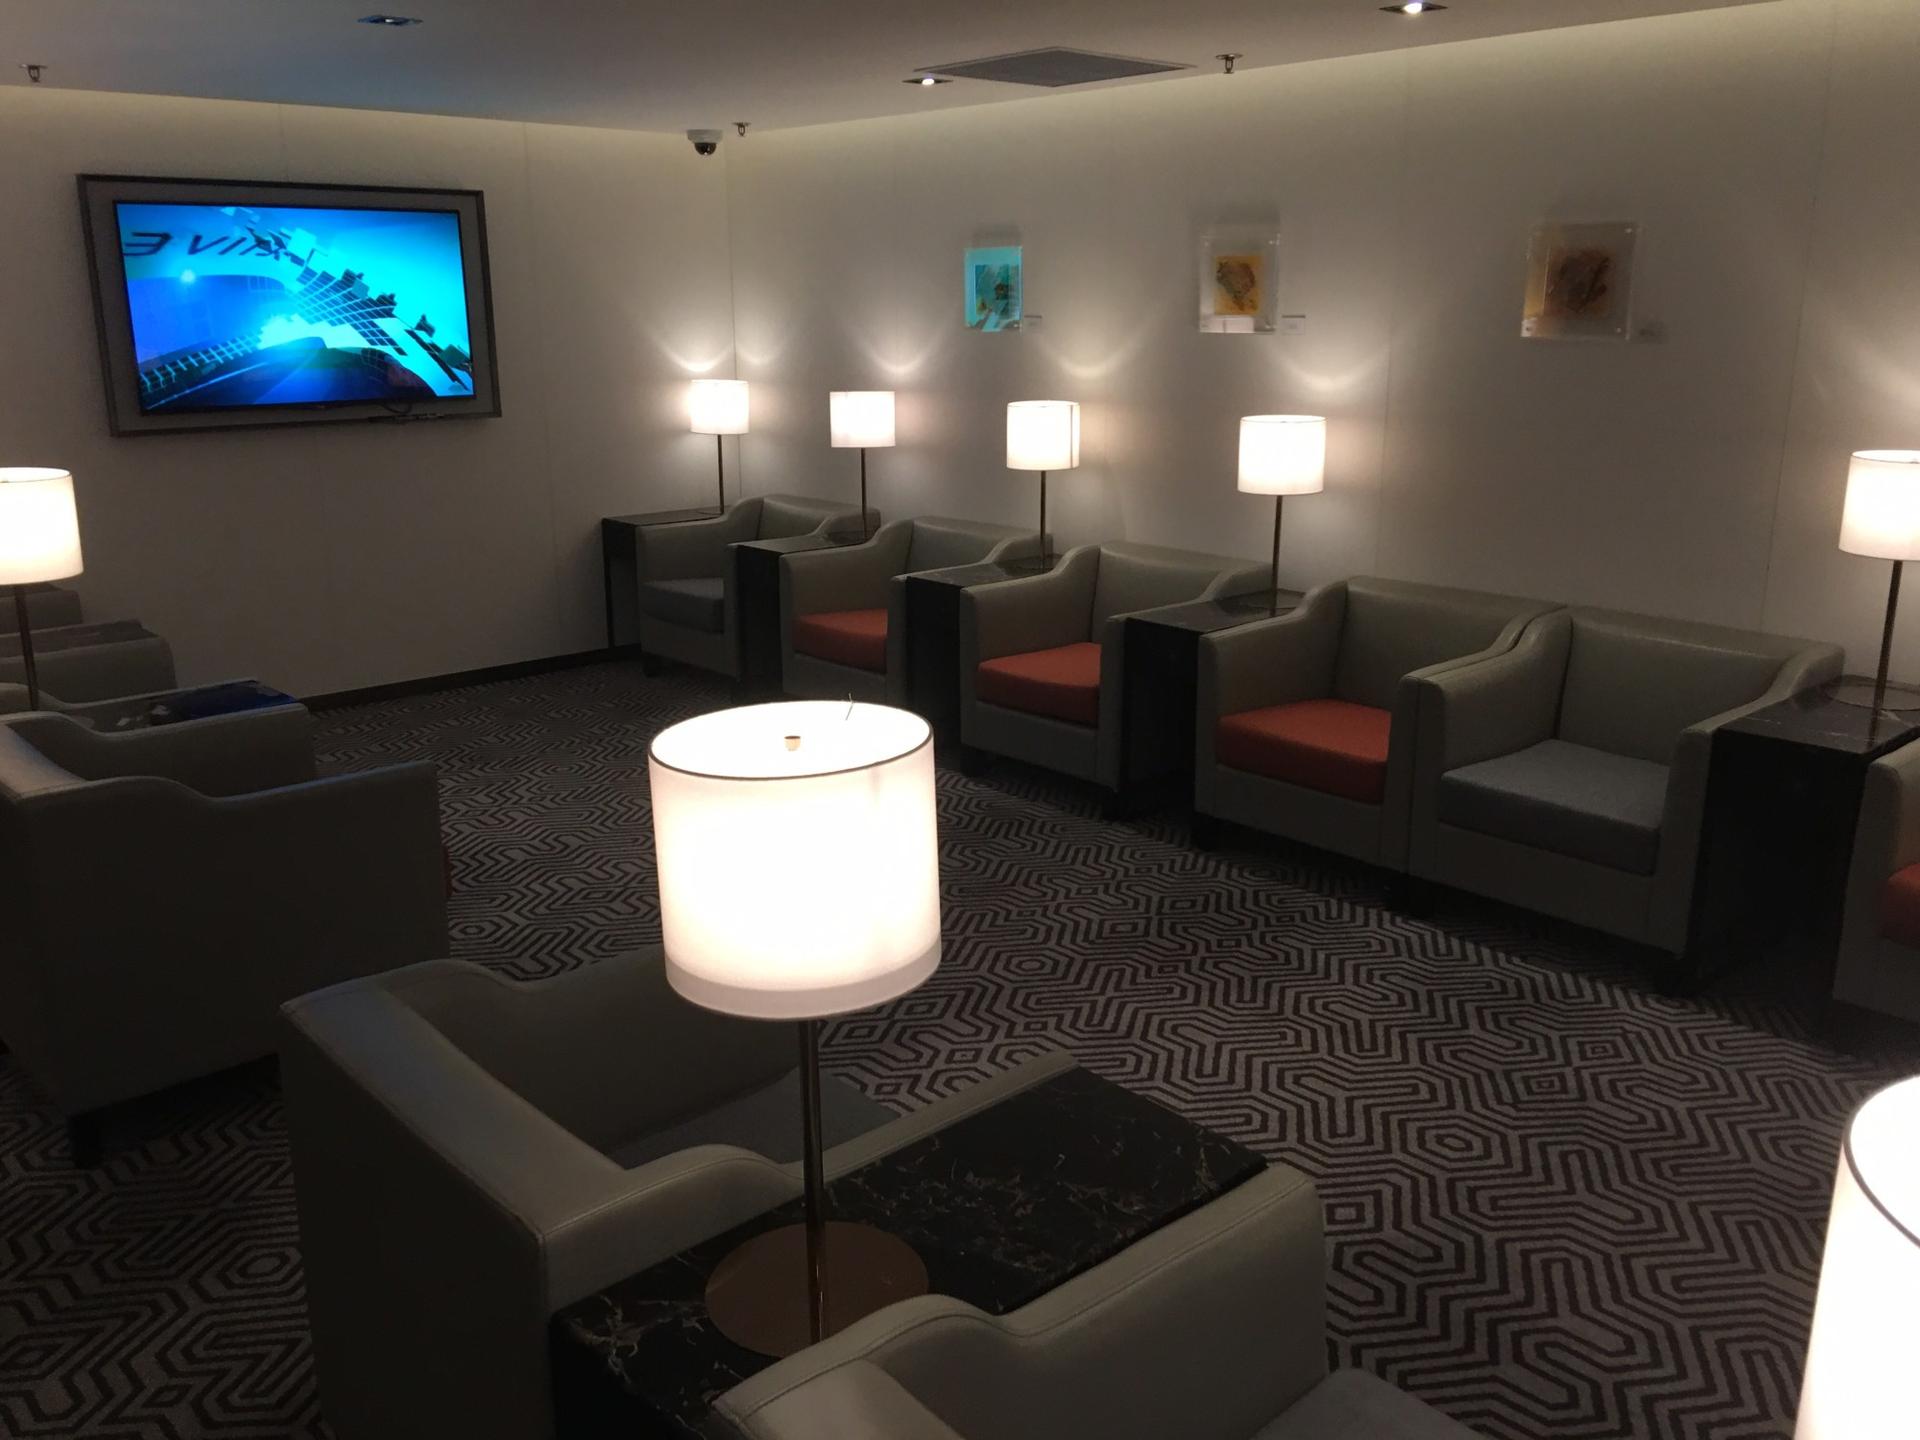 Singapore Airlines SilverKris Business Class Lounge image 34 of 68